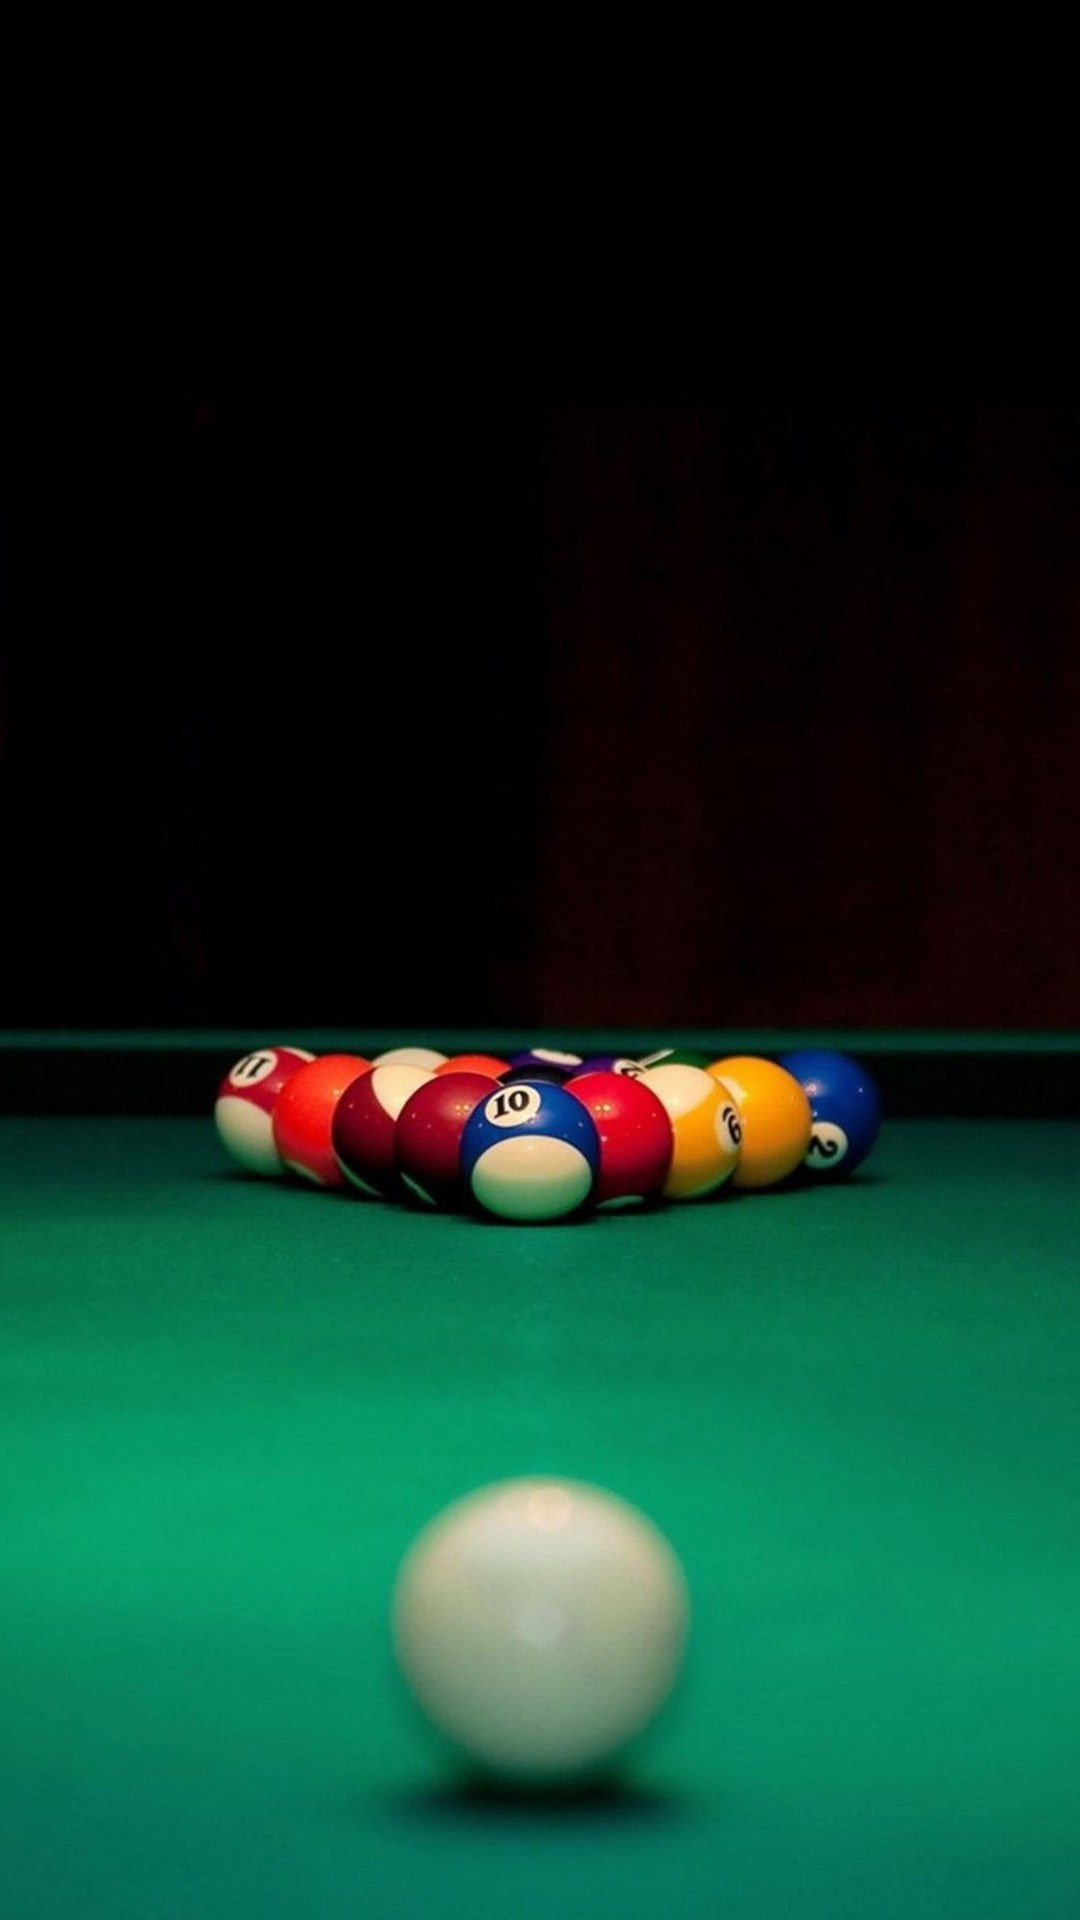 1080x1920 Download the Android 8-ball Pool wallpaper